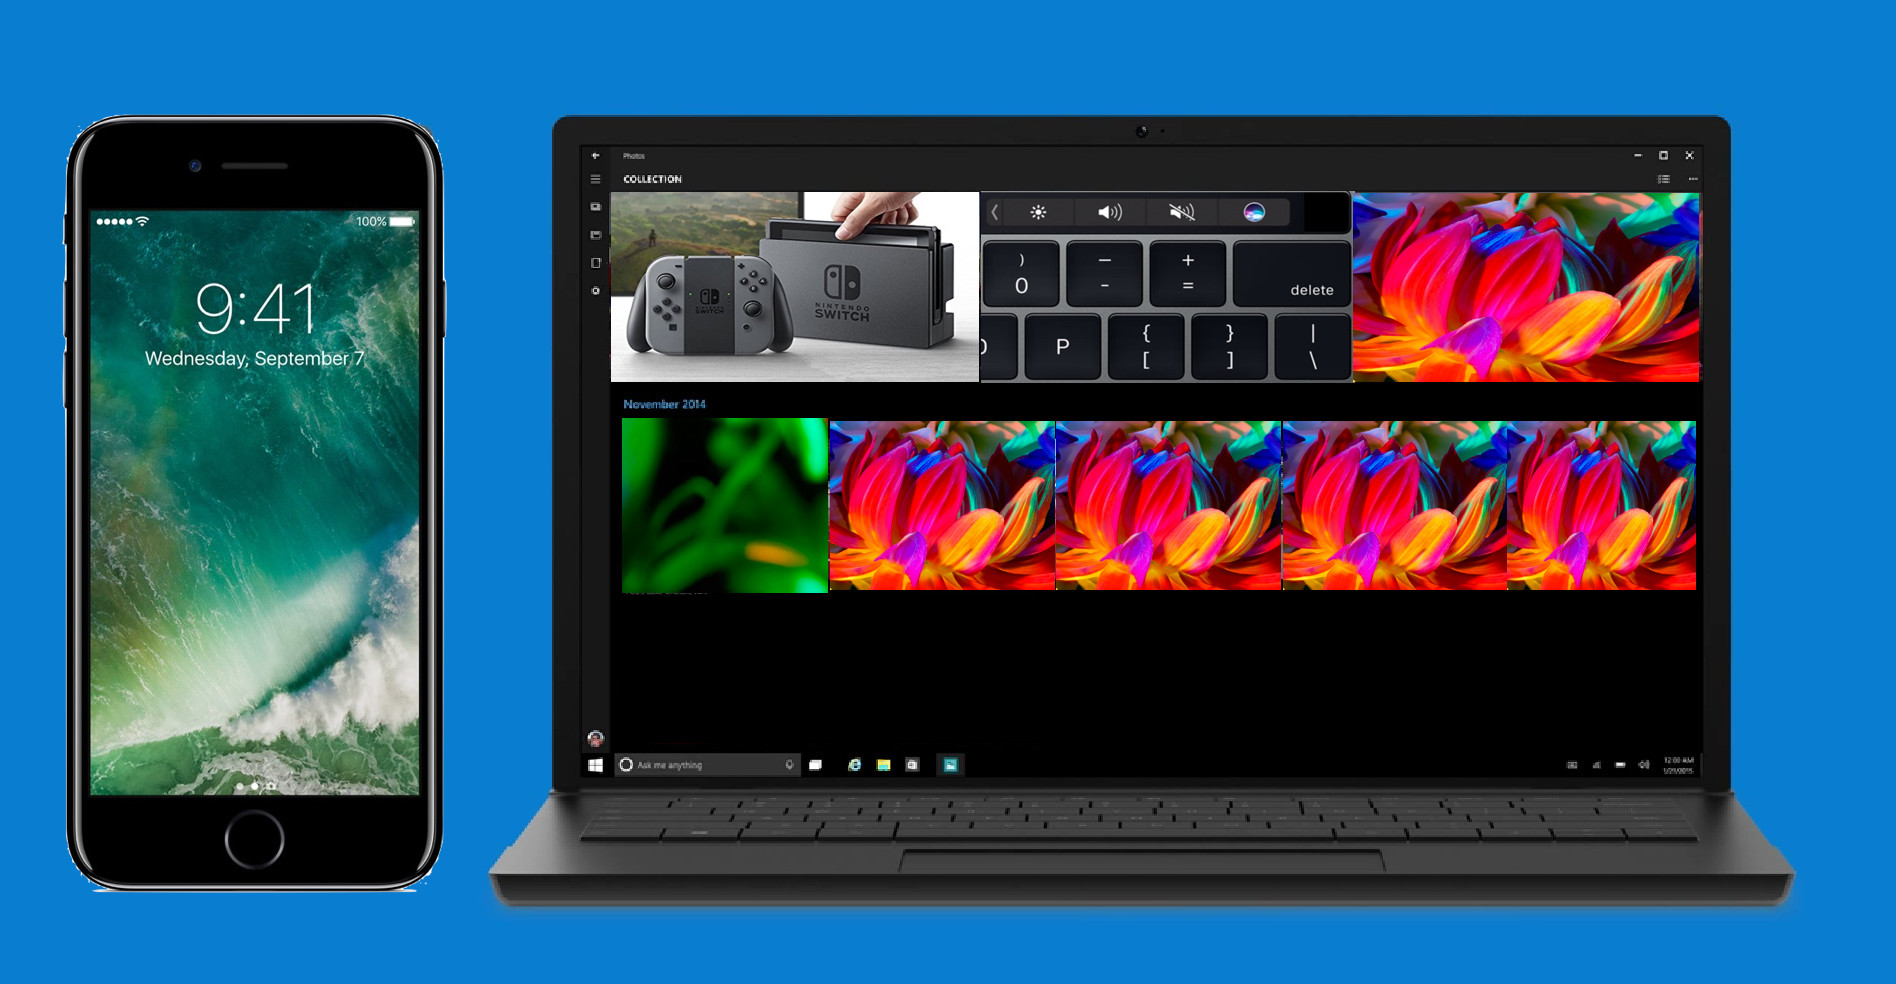 How To Transfer Photos From Iphone To Windows 10 Pc Osxdaily